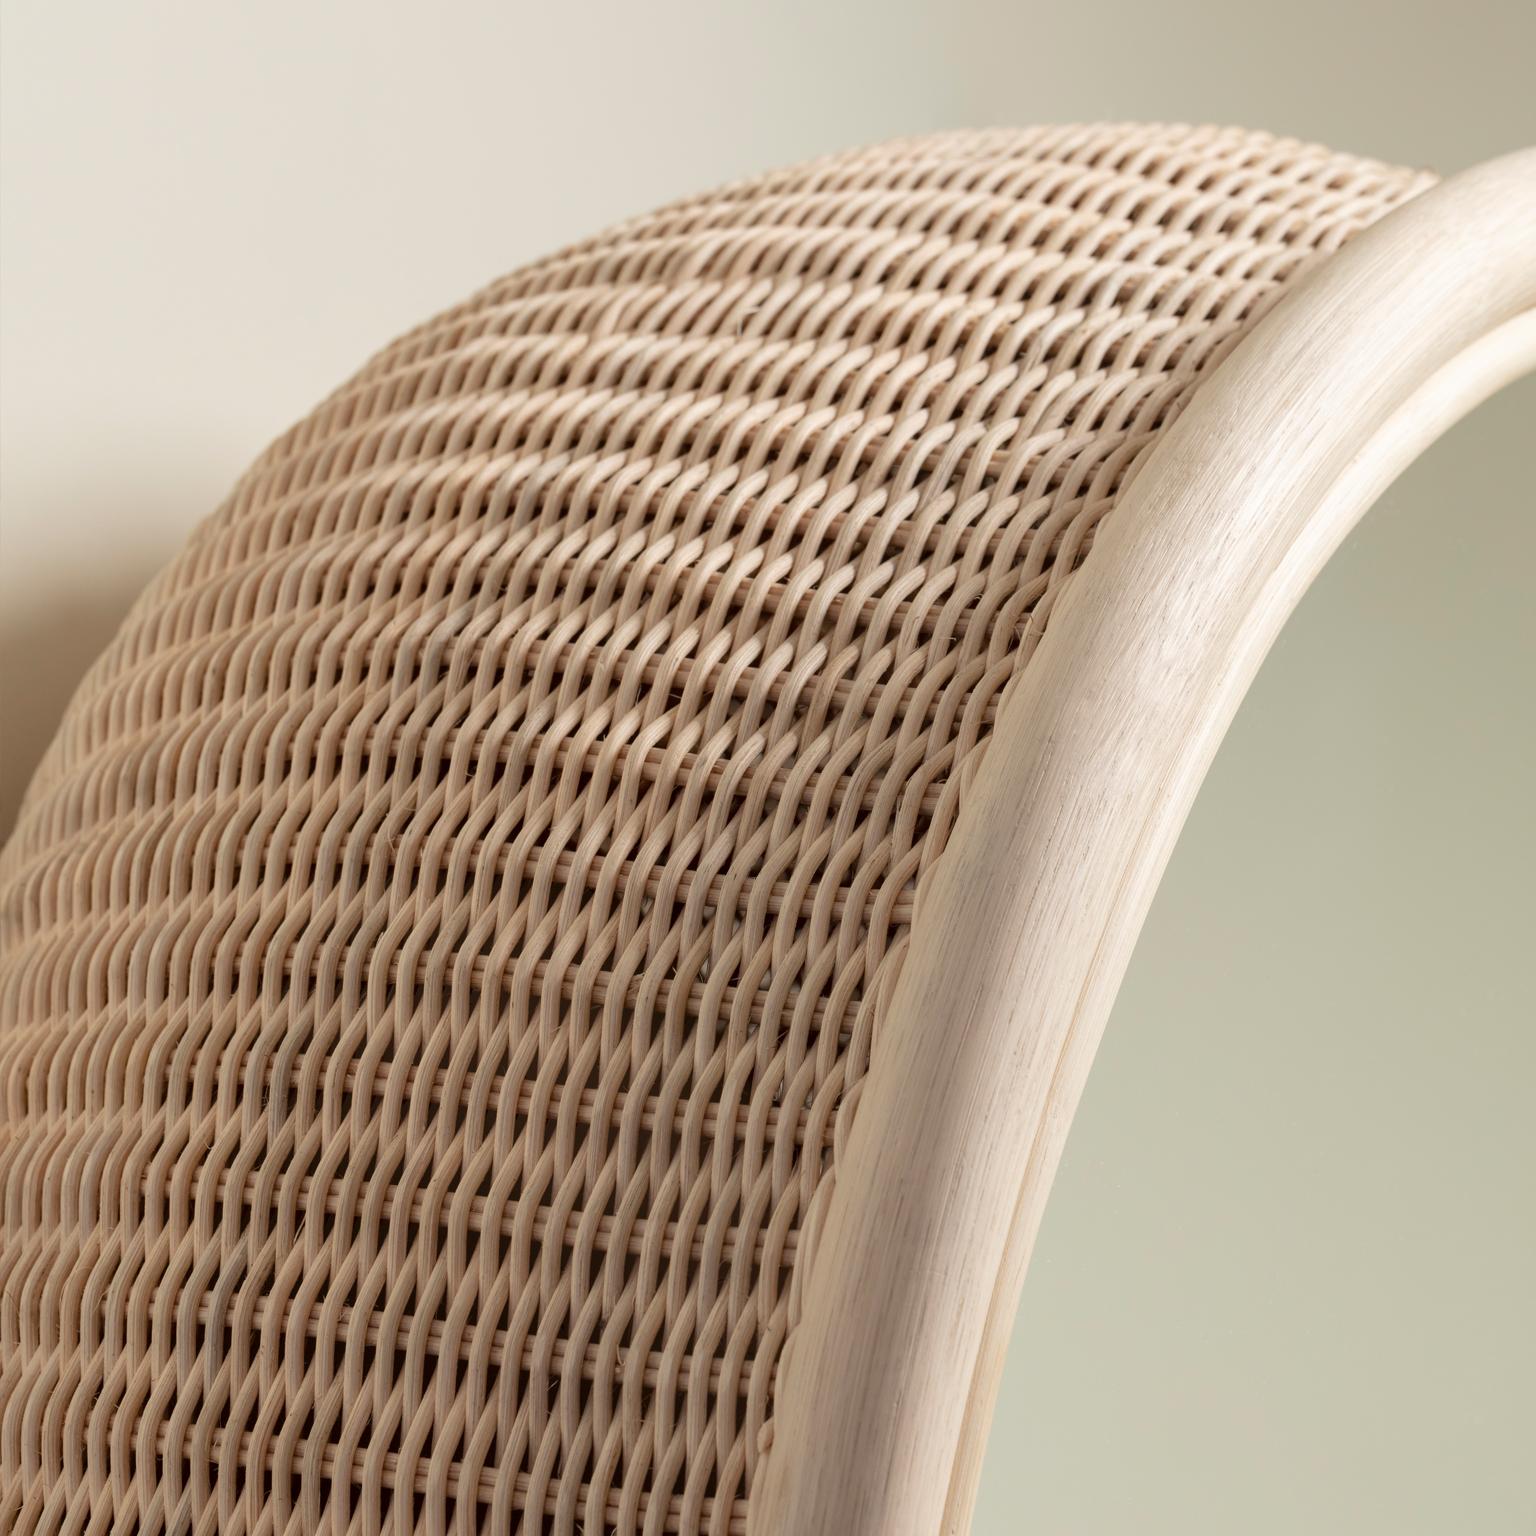 Azalea is a wall mirror inspired by the traditional woven wicker baskets in Mexico; Its design is generous and can be appreciated from different angles, which gives it a unique and very special personality.

Azalea is made of woven natural wicker